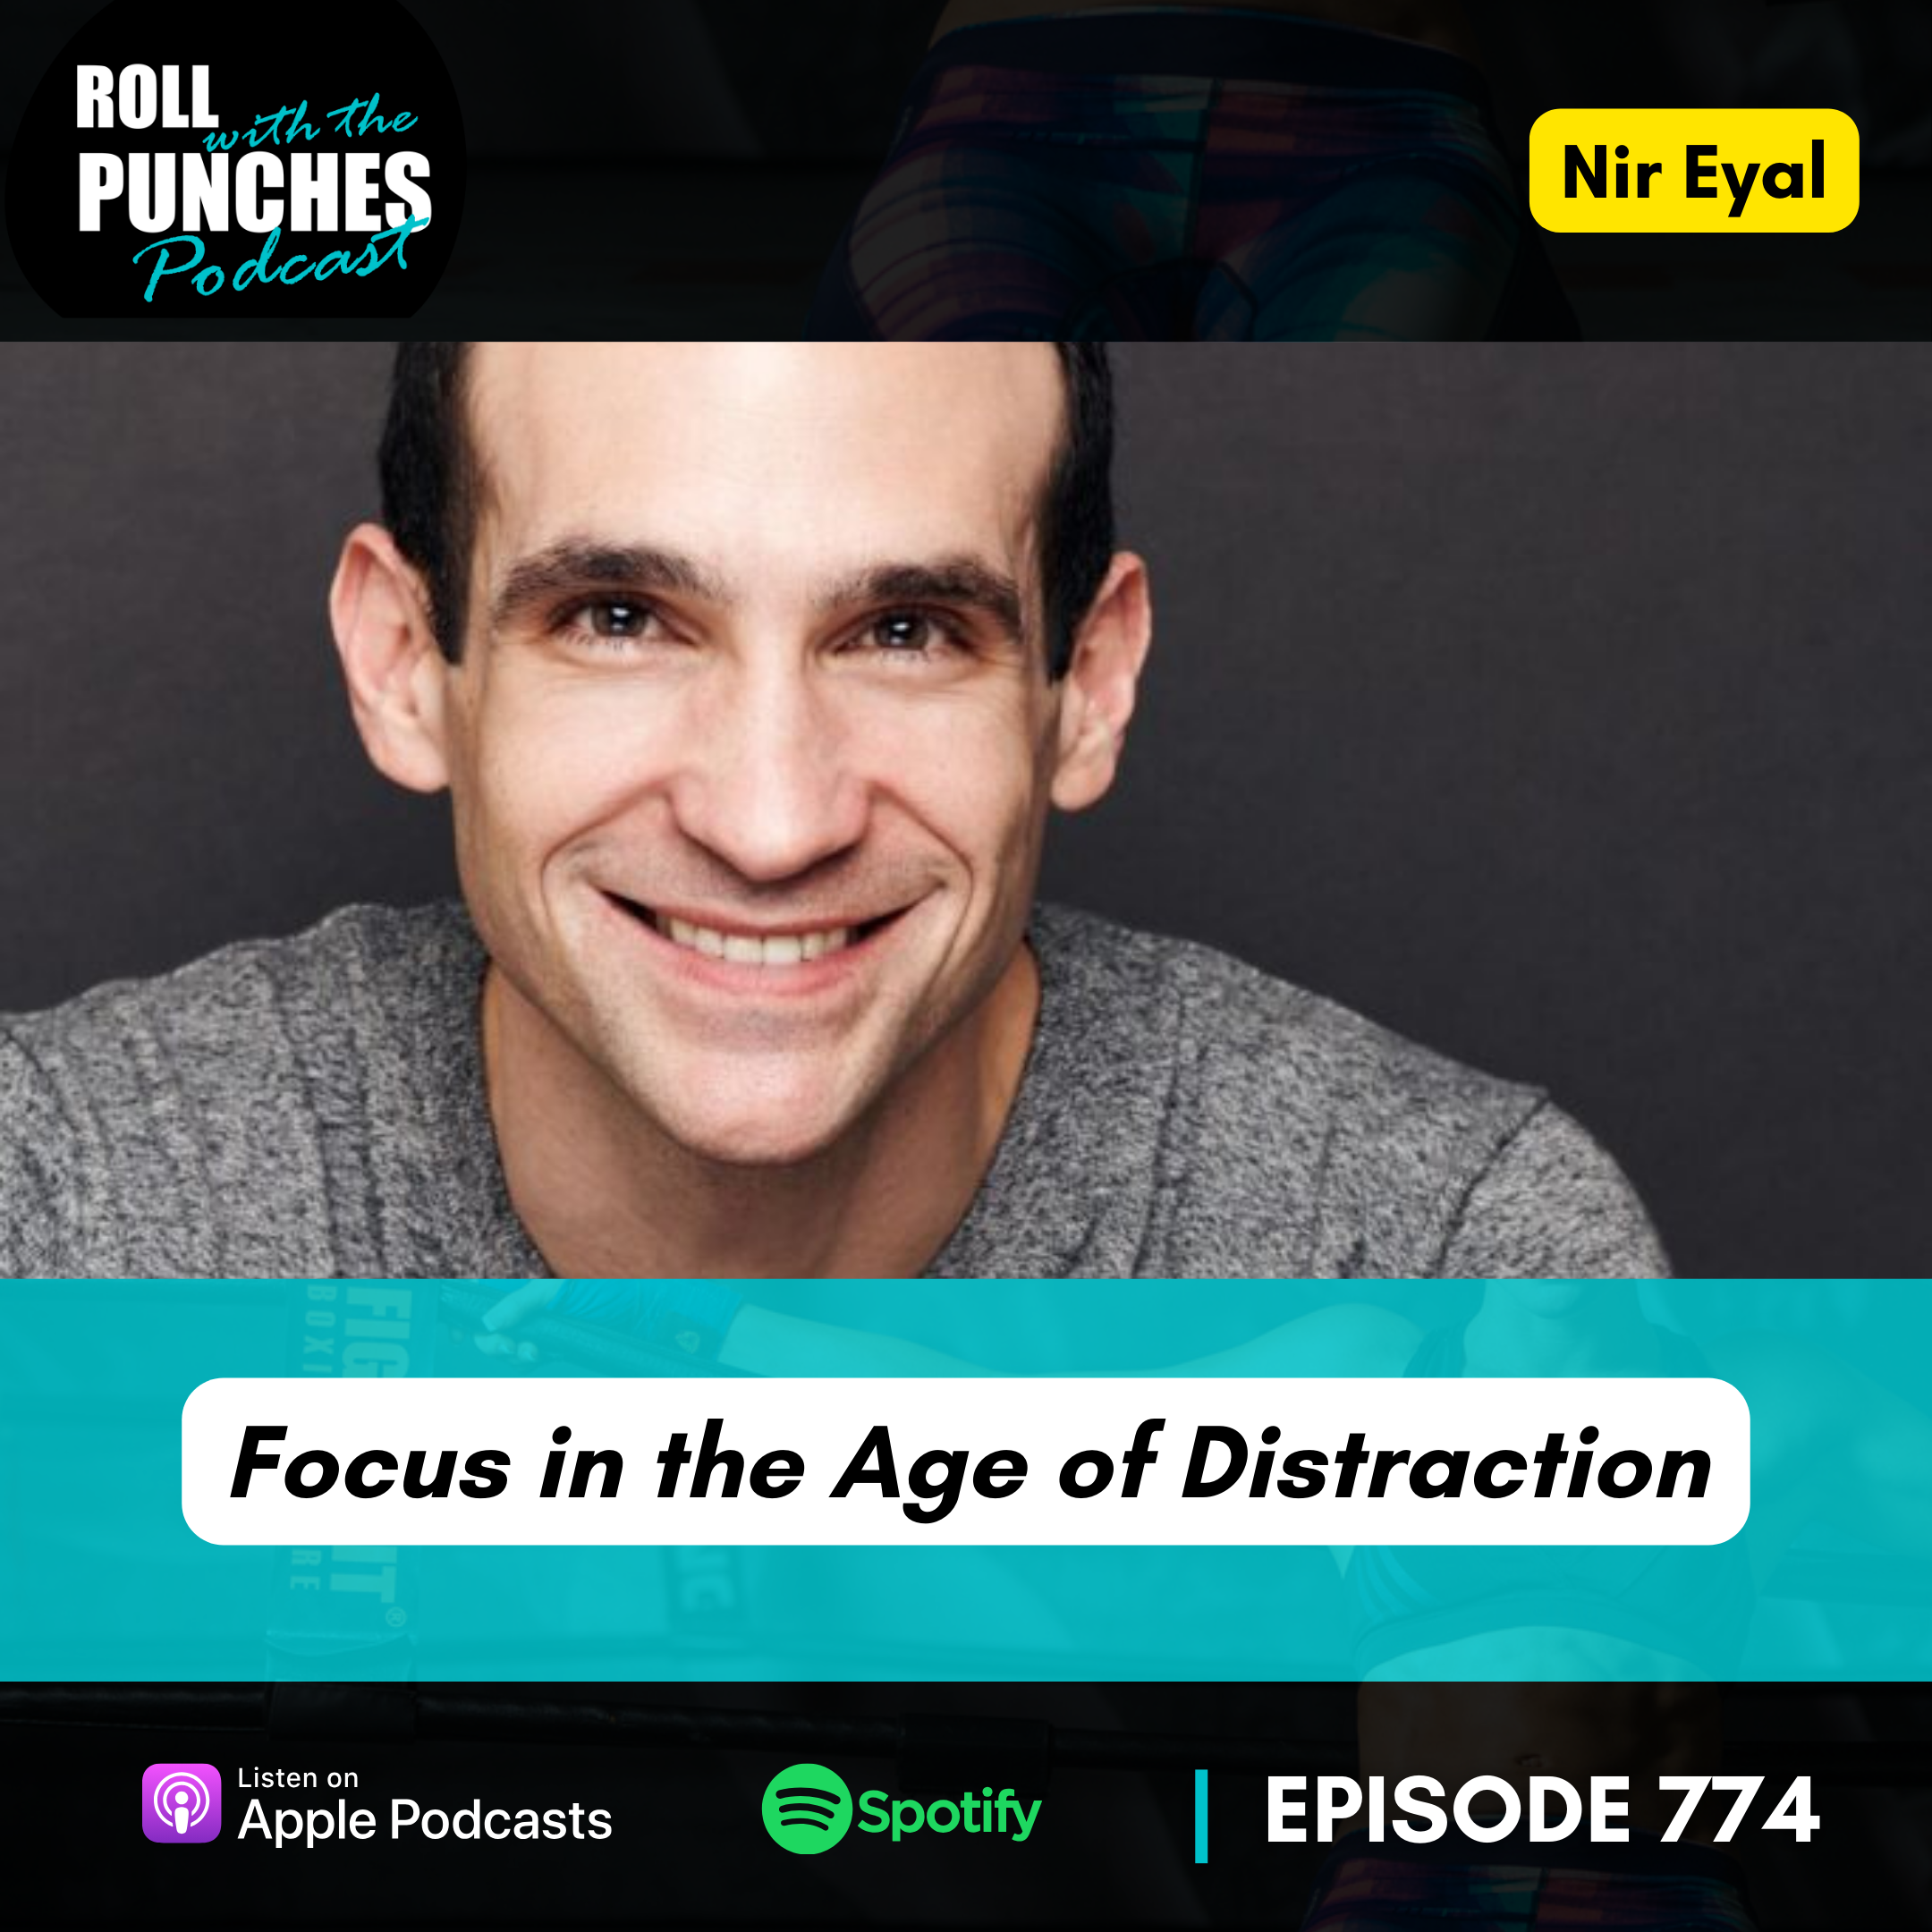 Focus in the Age of Distraction | Nir Eyal - 774